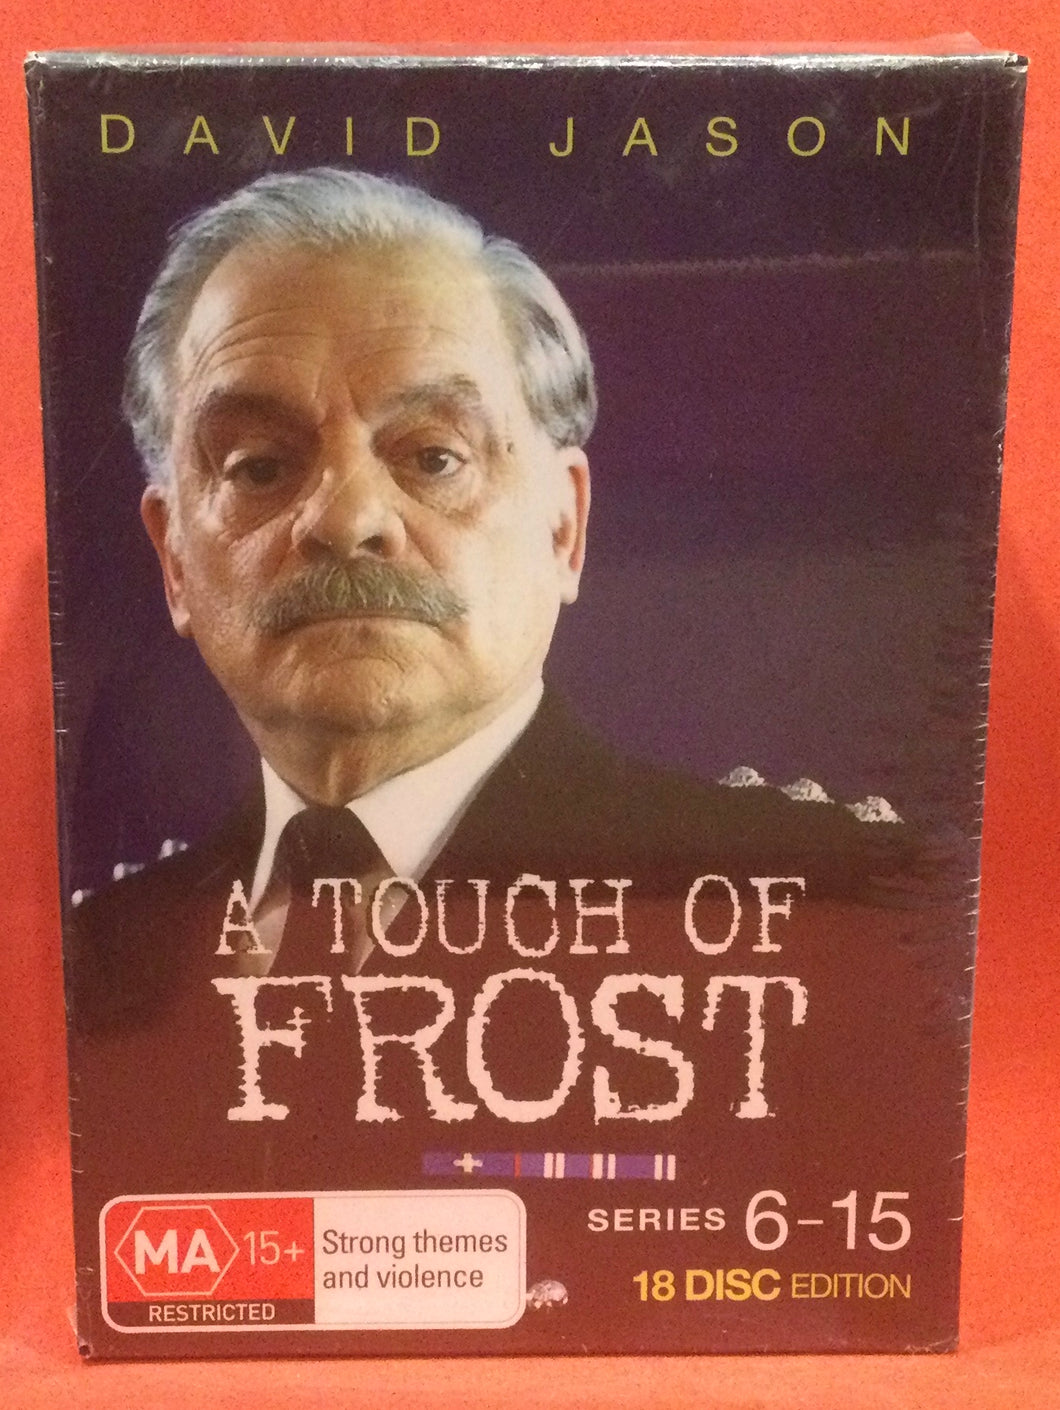 TOUCH OF FROST SERIES 6-15 DVD